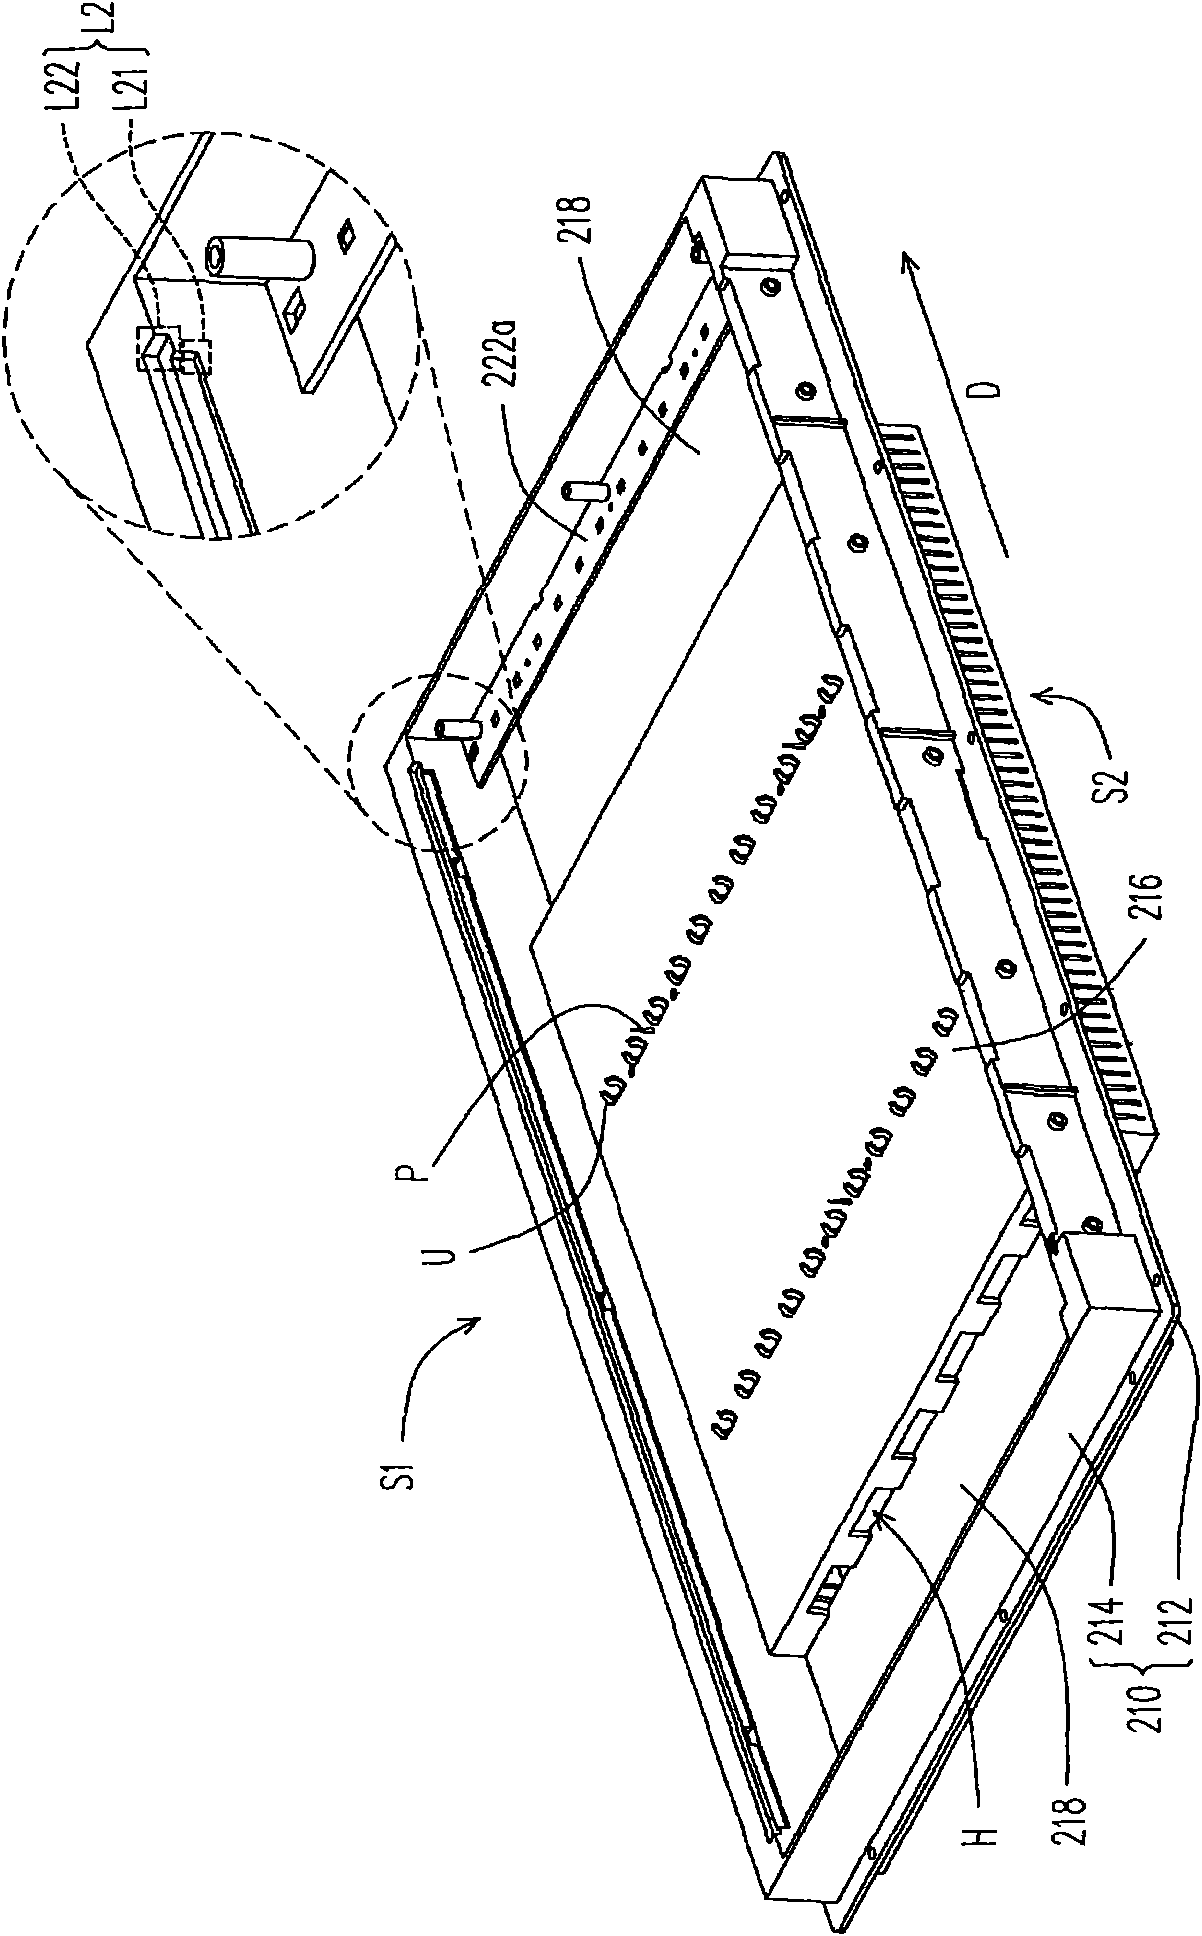 Liquid crystal display device and assembly method thereof